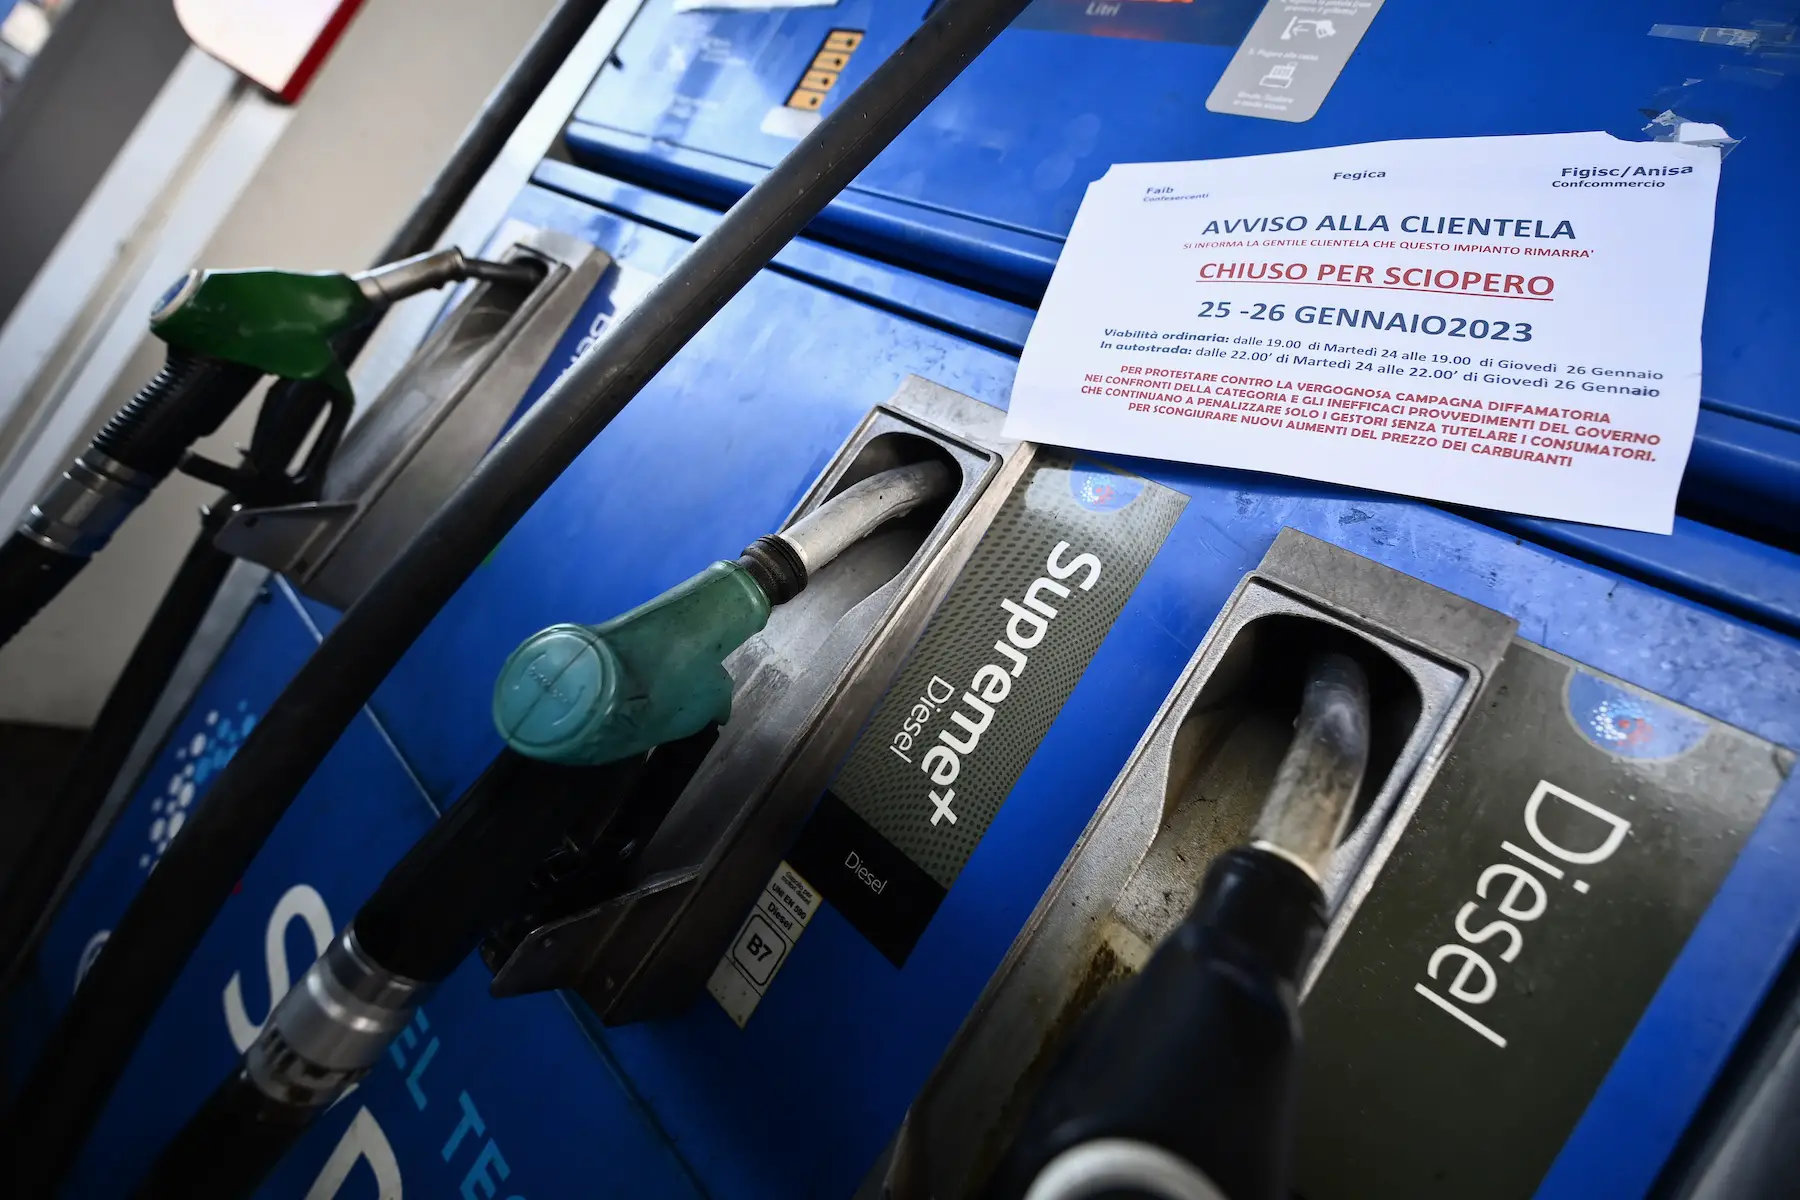 A piece of paper taped to gas pumps at a Torino gas station warns customers that the station will be closed for a strike